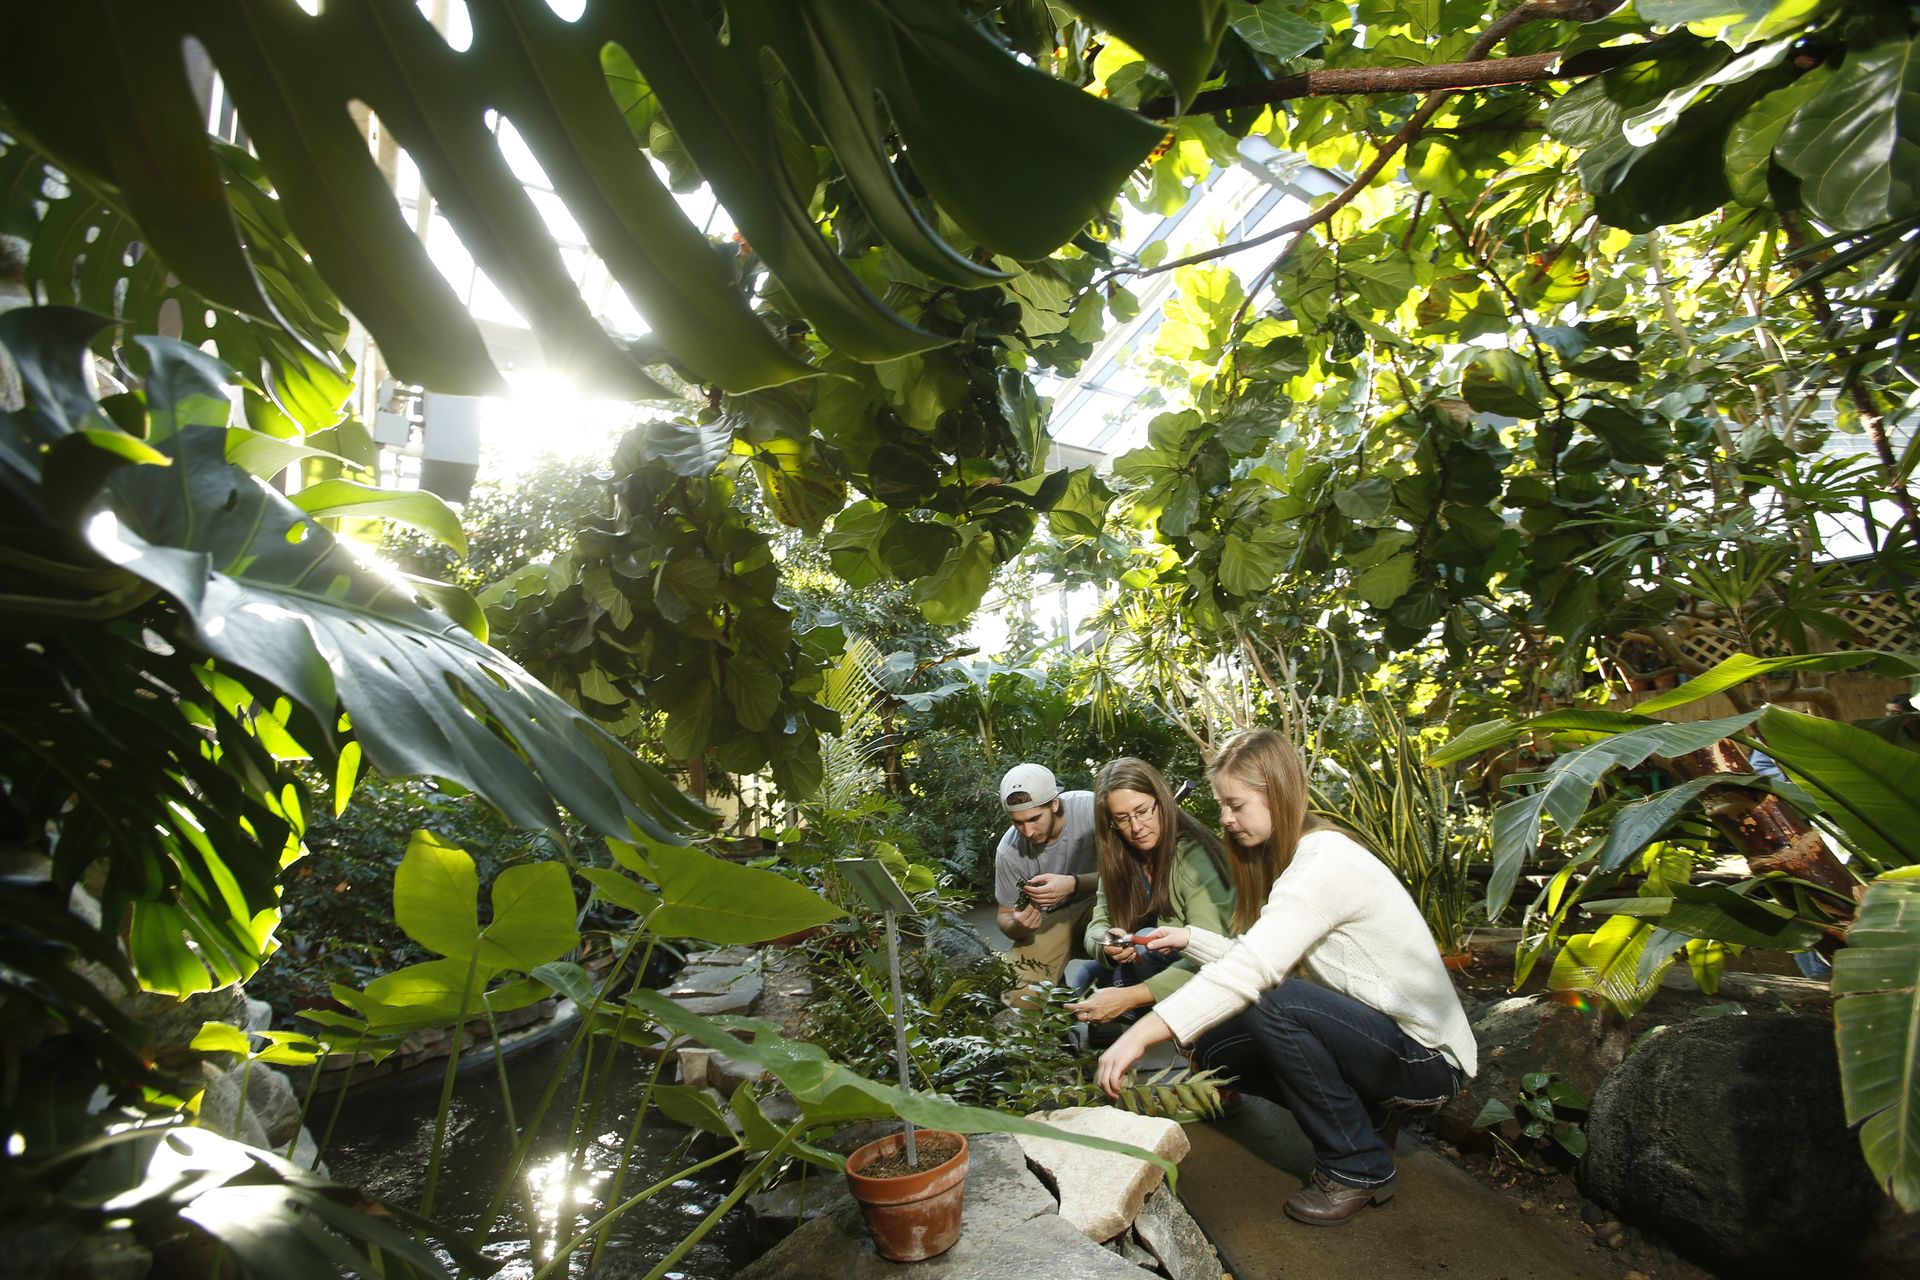 Students working with plants in the greenhouse located on campus.